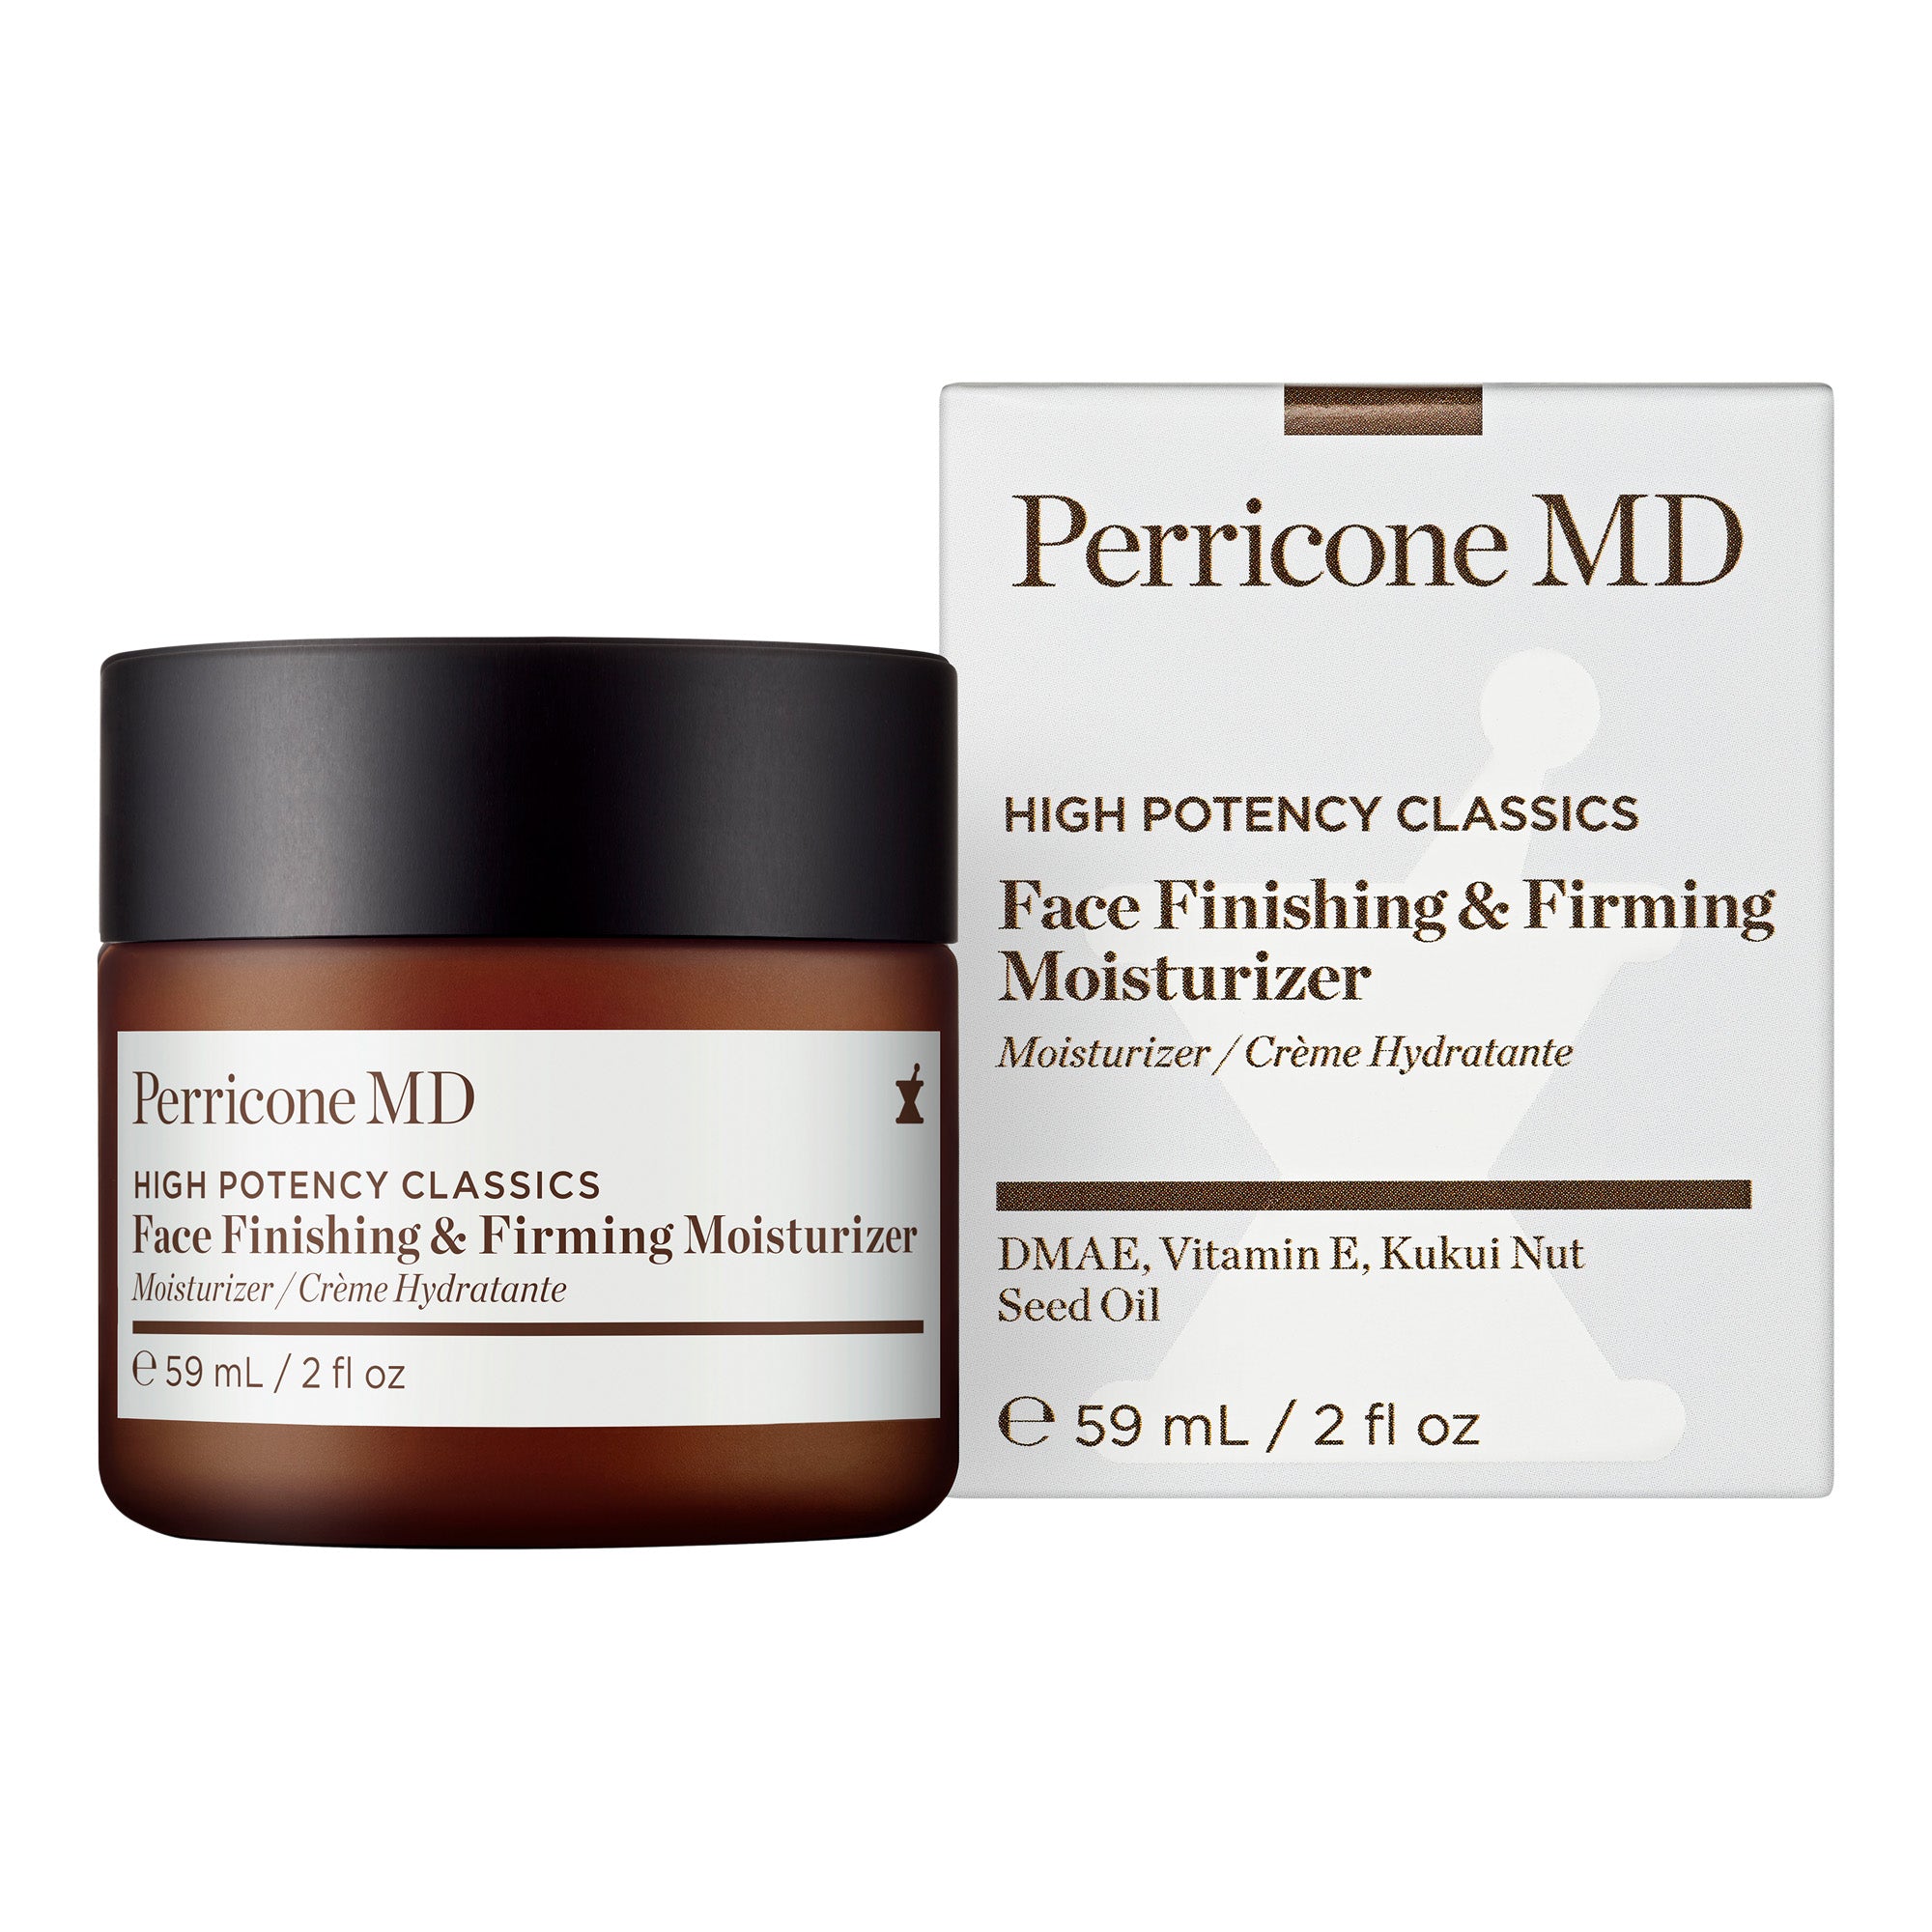 Perricone MD High Potency Classics Face Finishing & Firming Moisturizer / 2OZ